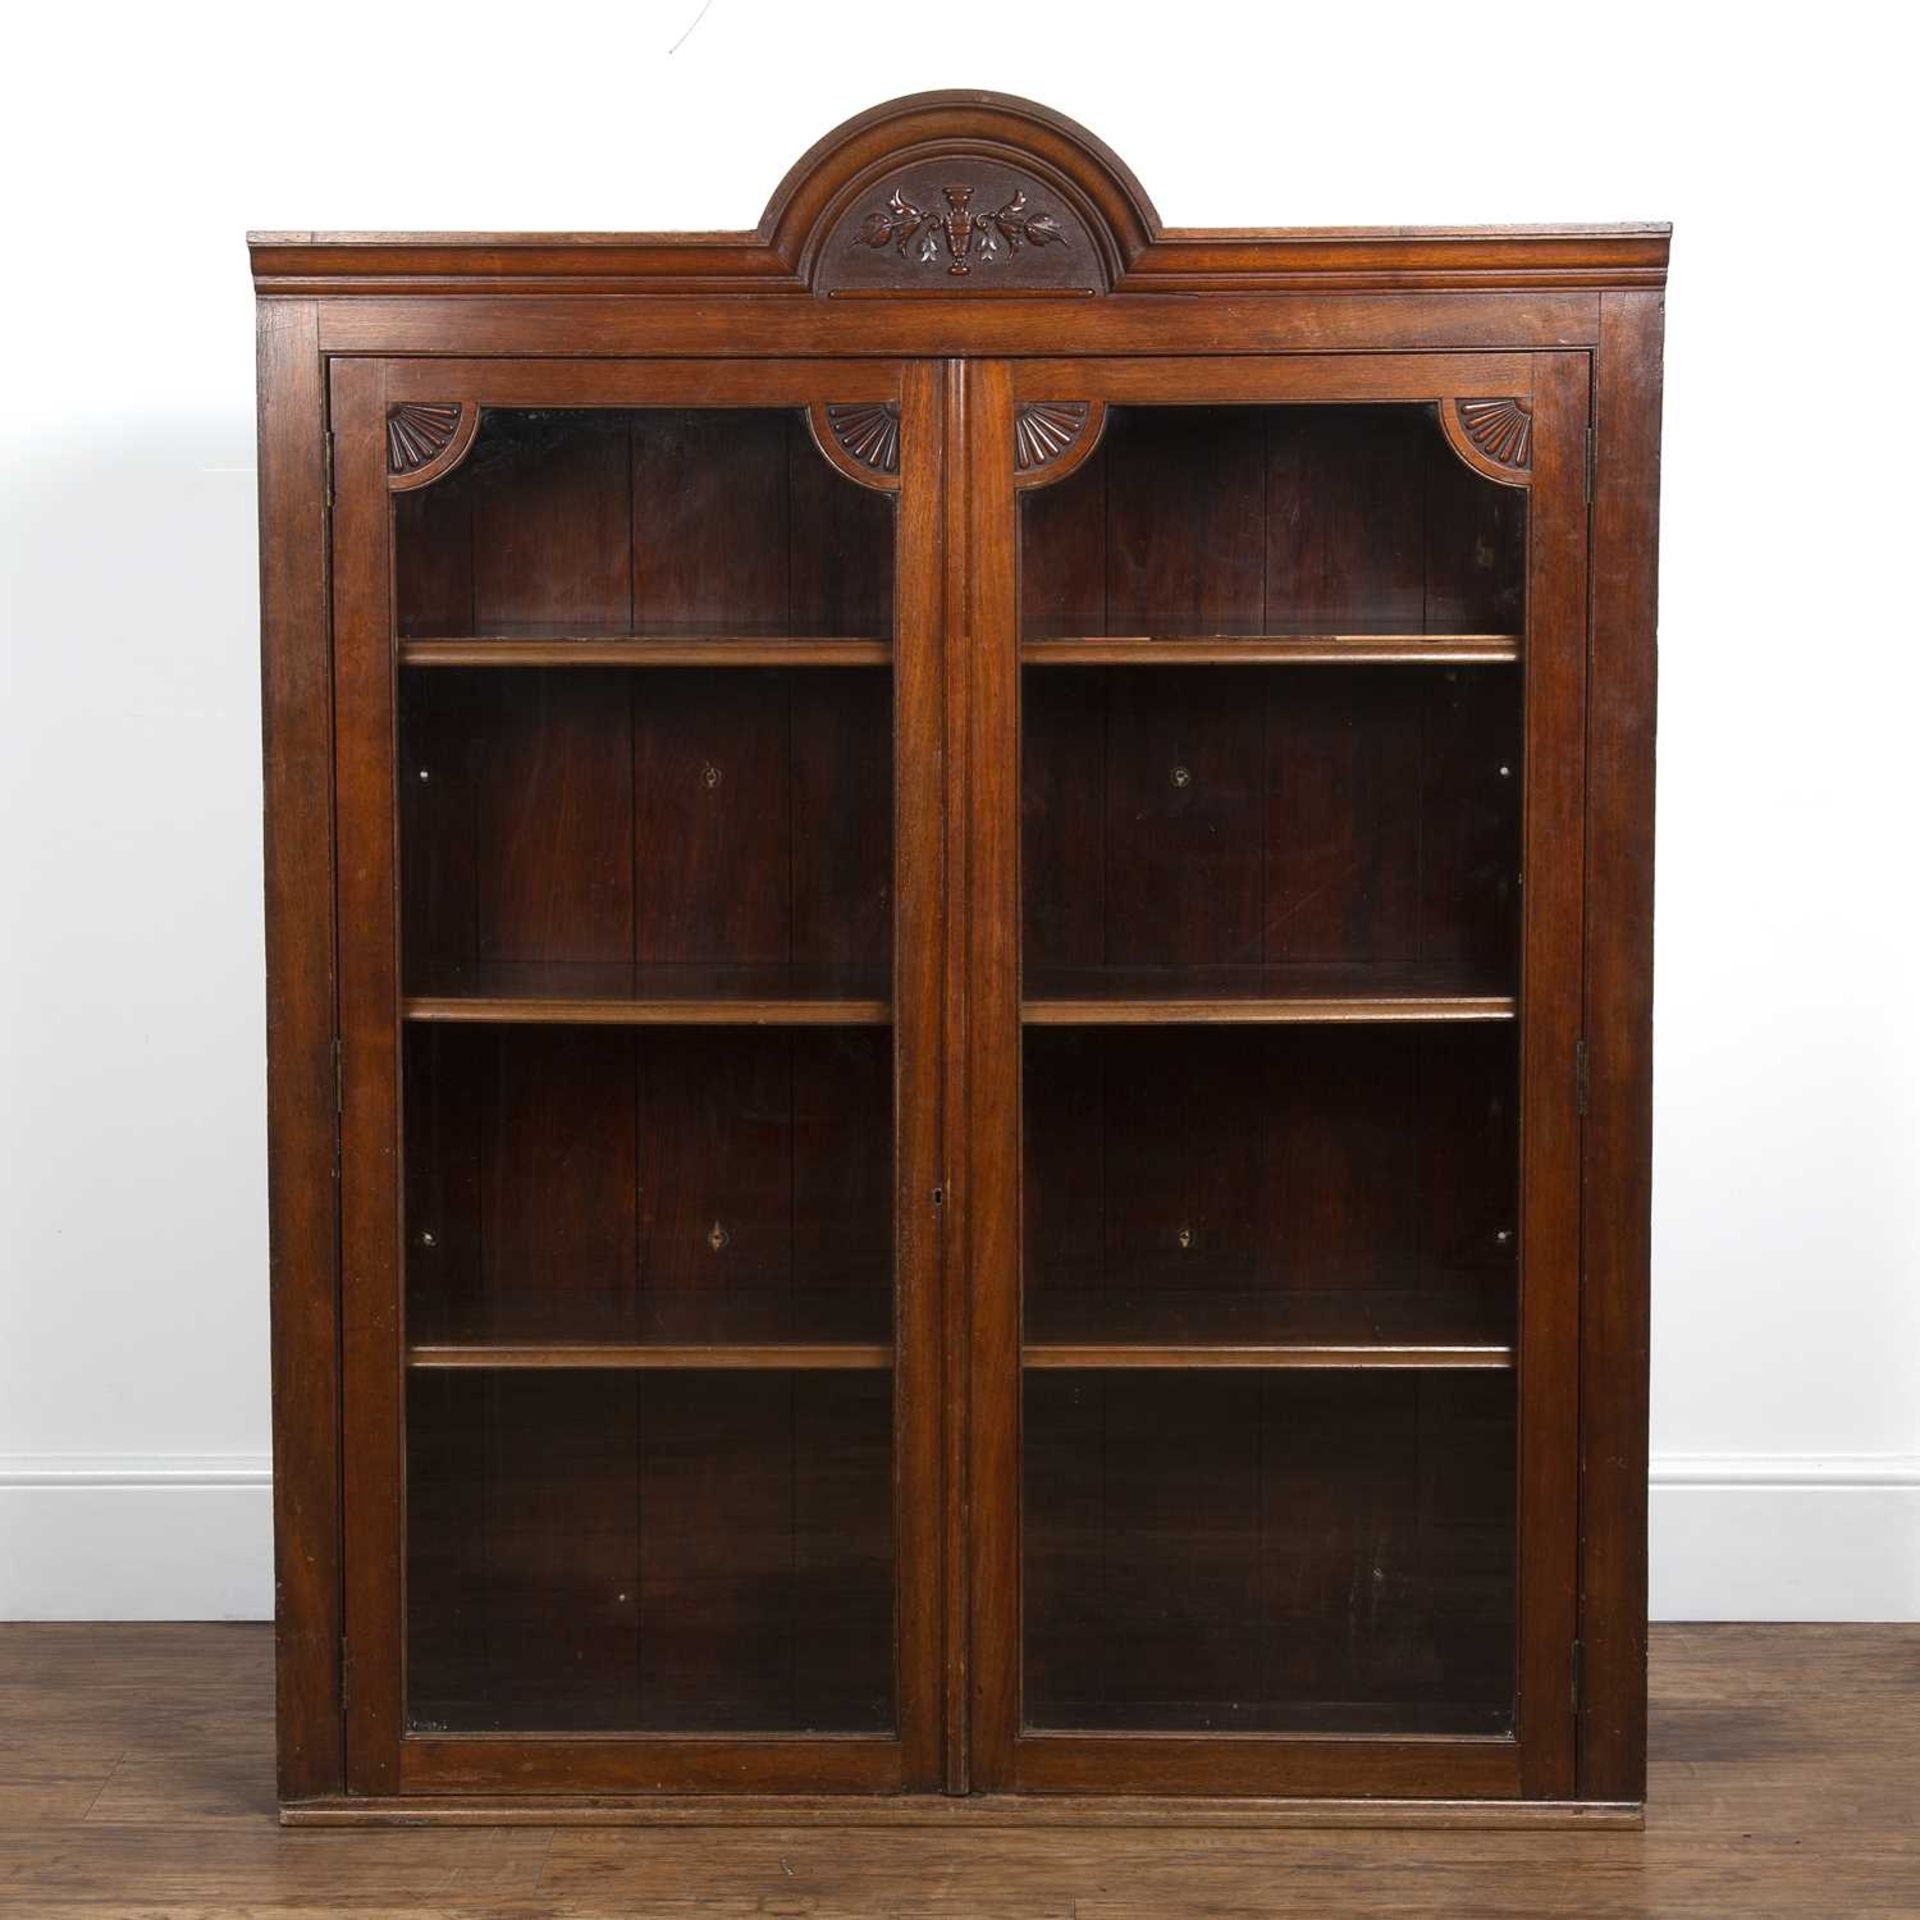 Glazed mahogany wall cabinet 19th Century, with an arched pediment, 119cm wide x 154cm high x 31cm